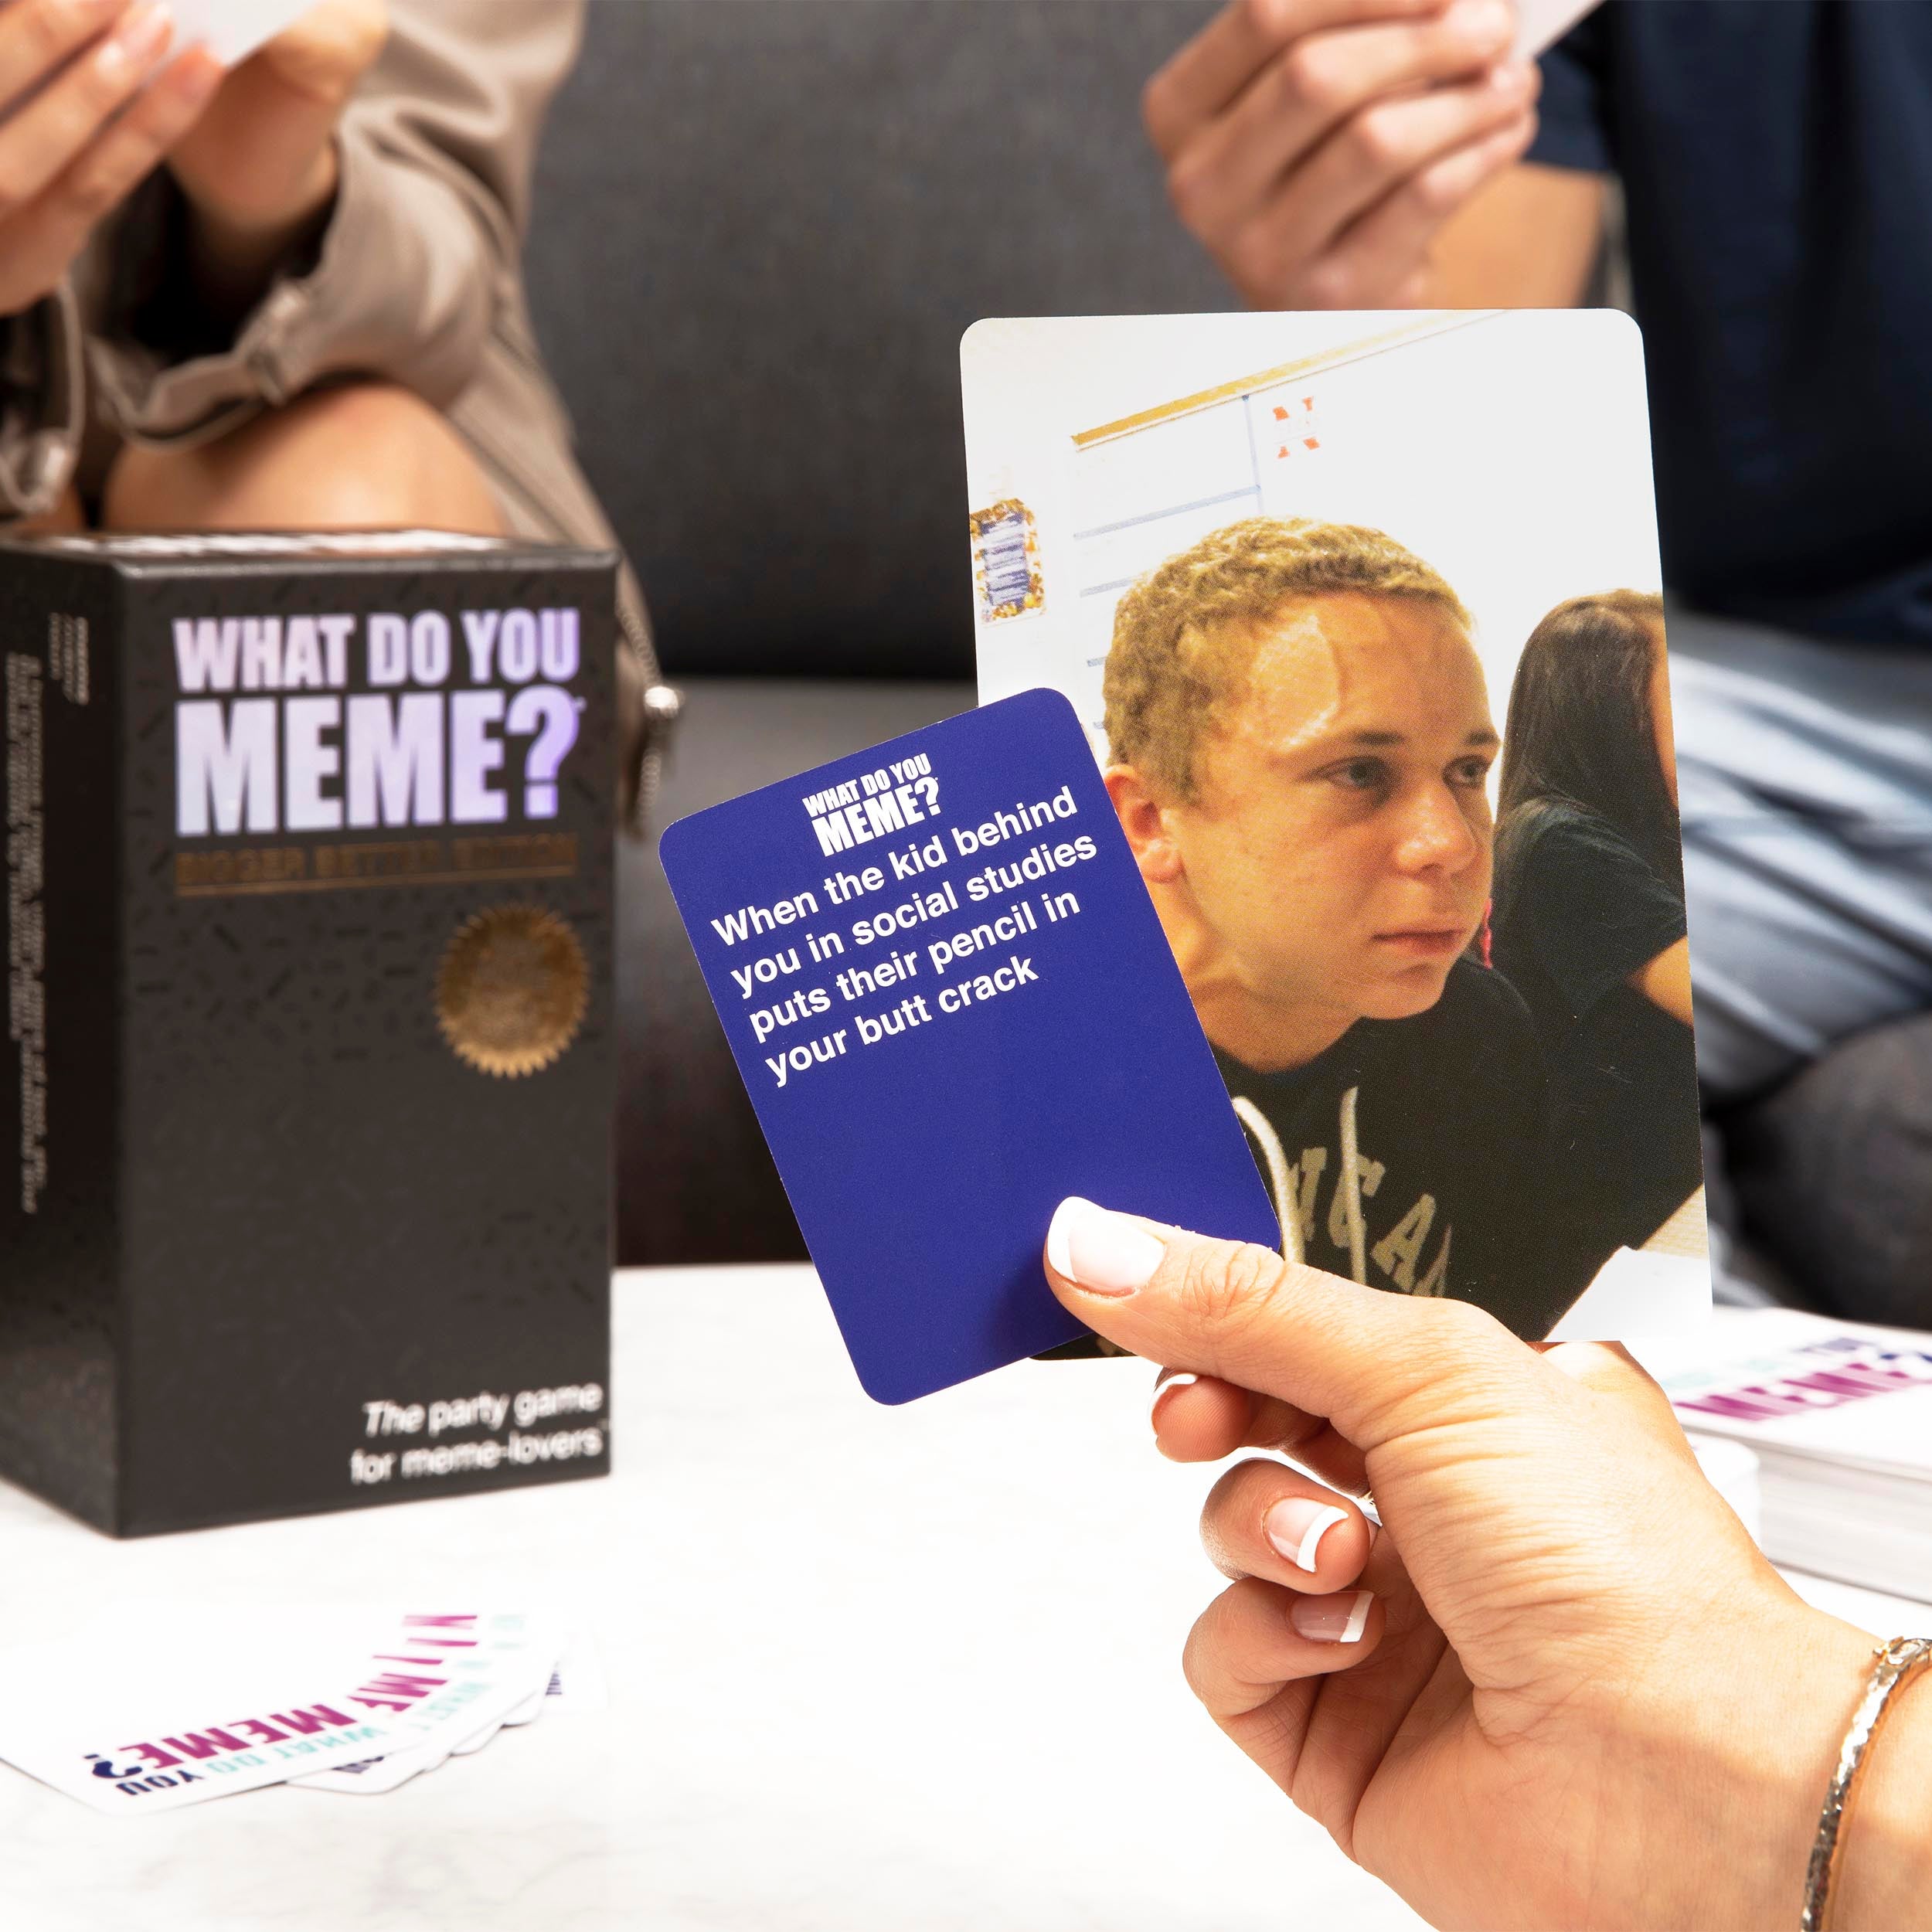 What Do You Meme? Bigger Better Edition Party Game - Shop Games at